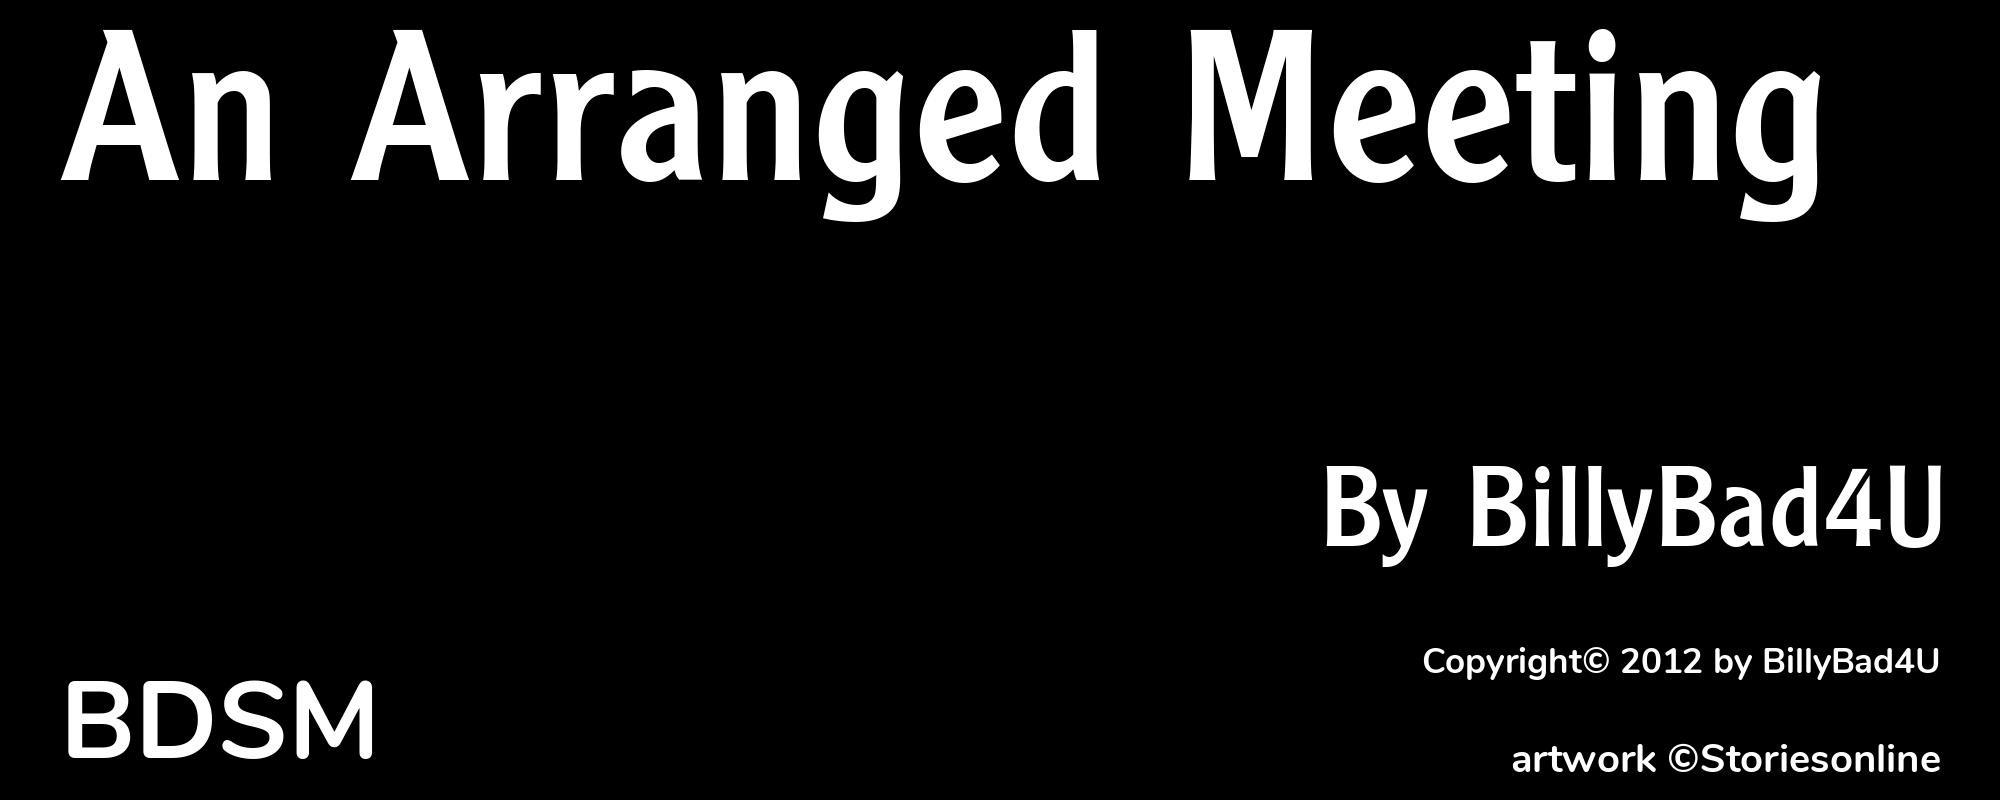 An Arranged Meeting - Cover